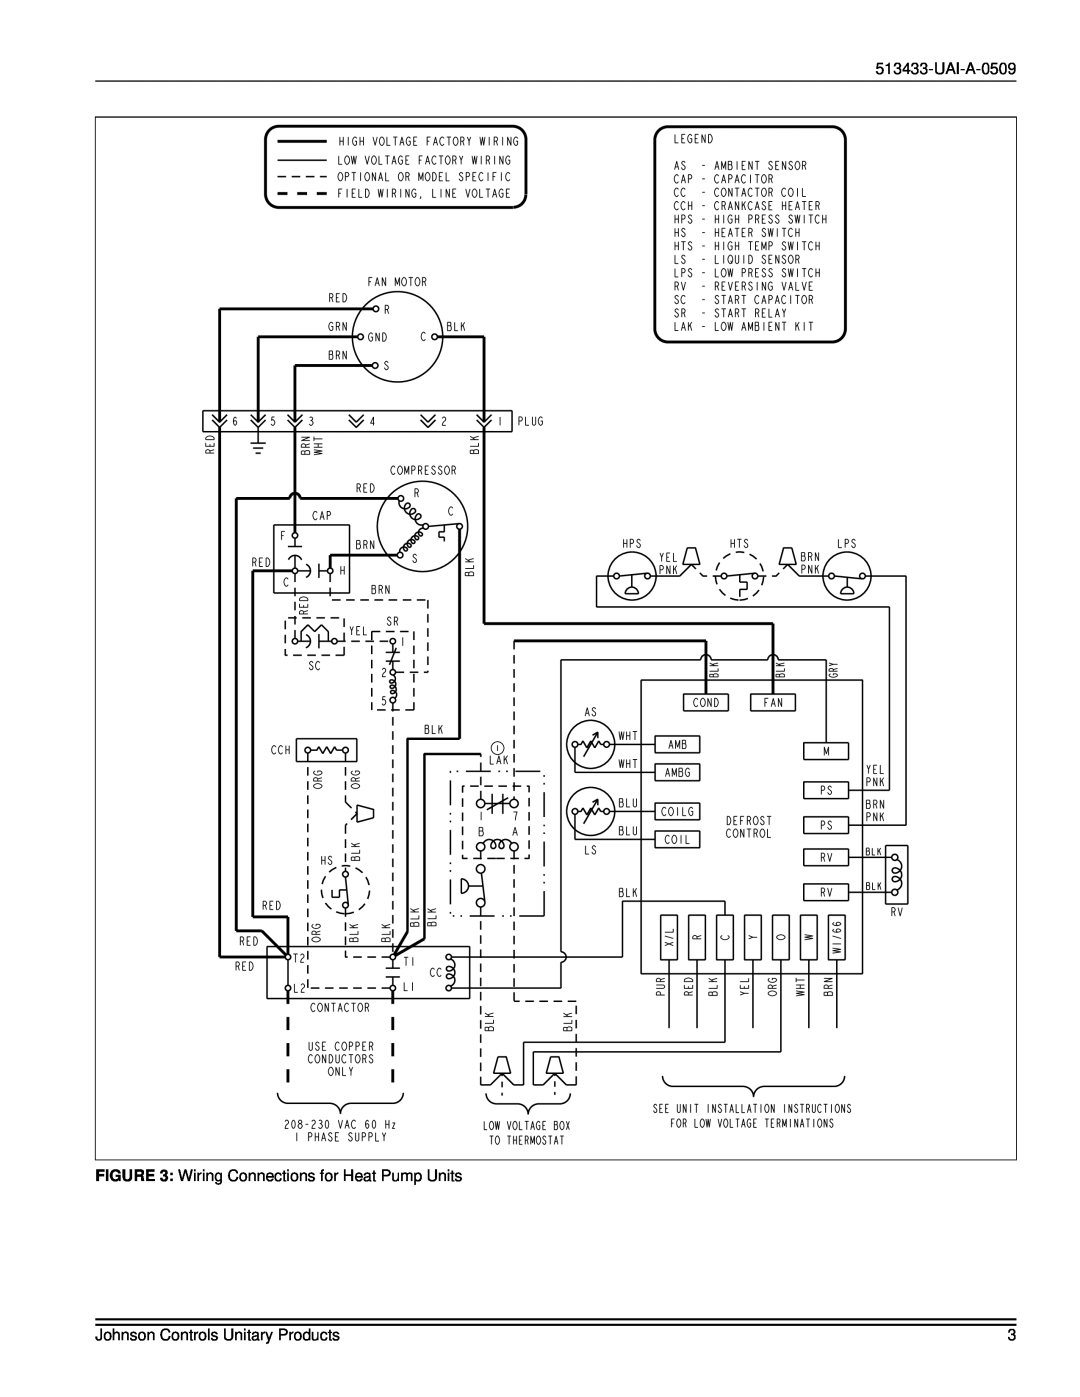 Johnson Controls Low Ambient Pressure Kit Wiring Connections for Heat Pump Units, Johnson Controls Unitary Products 